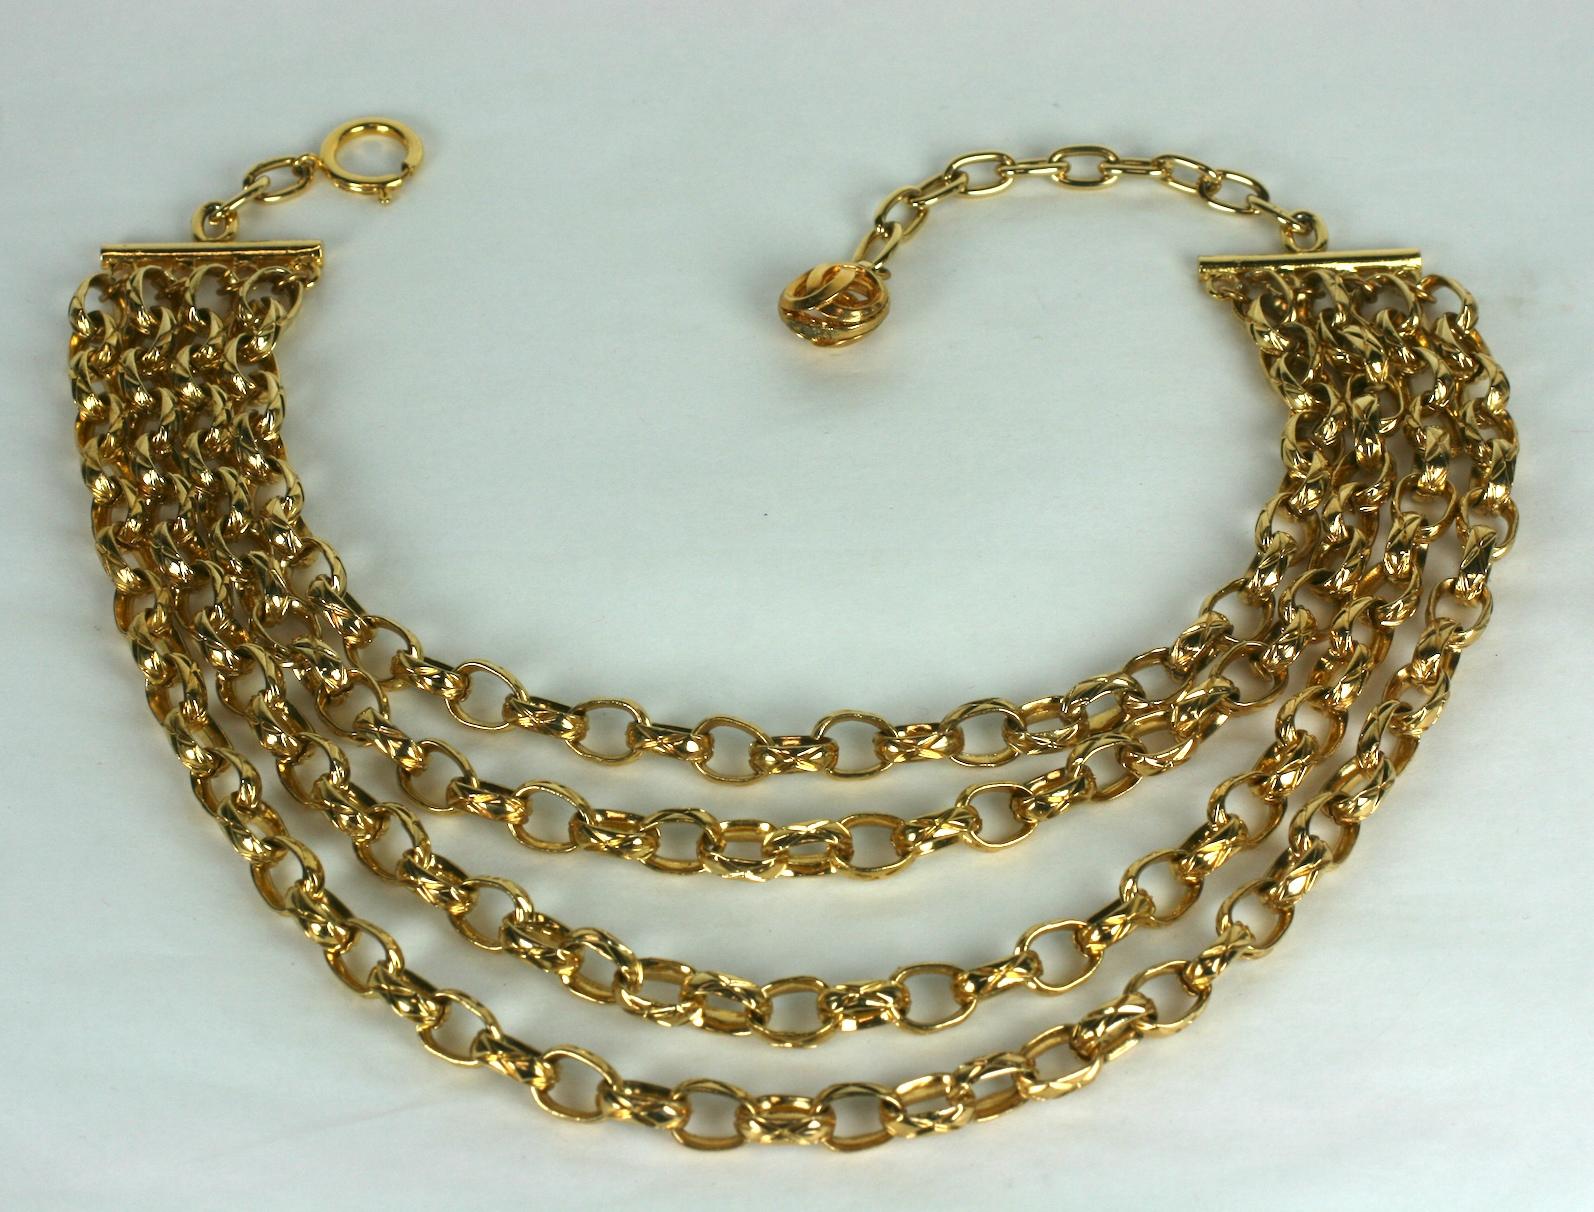 Chanel 4 Strand Textured Chain Necklace For Sale 2